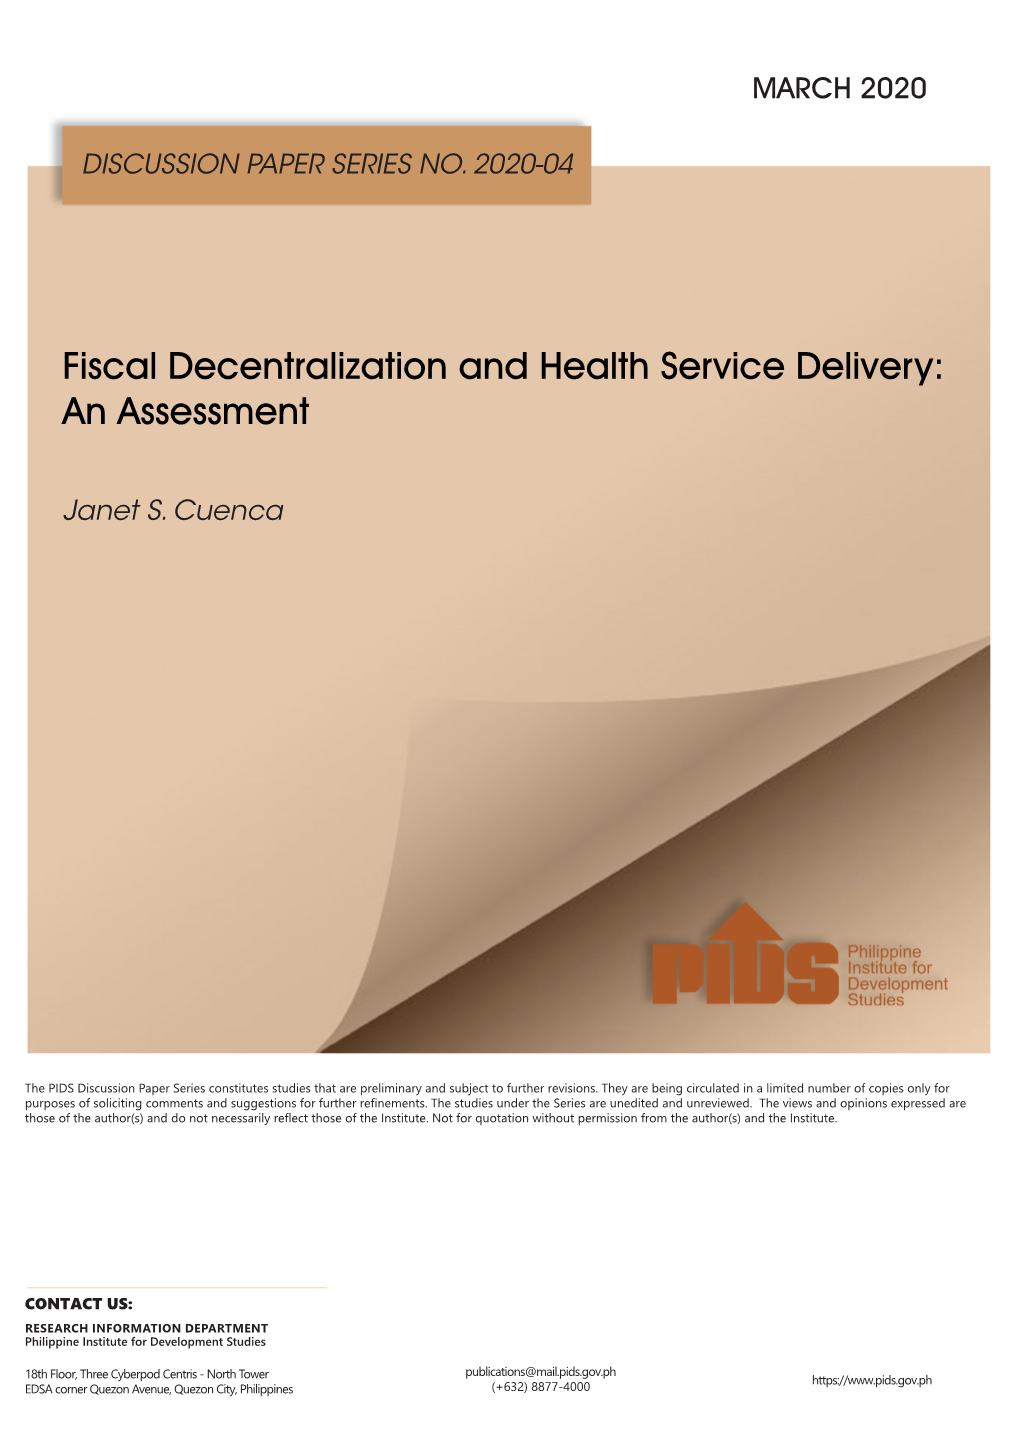 Fiscal Decentralization and Health Service Delivery: an Assessment